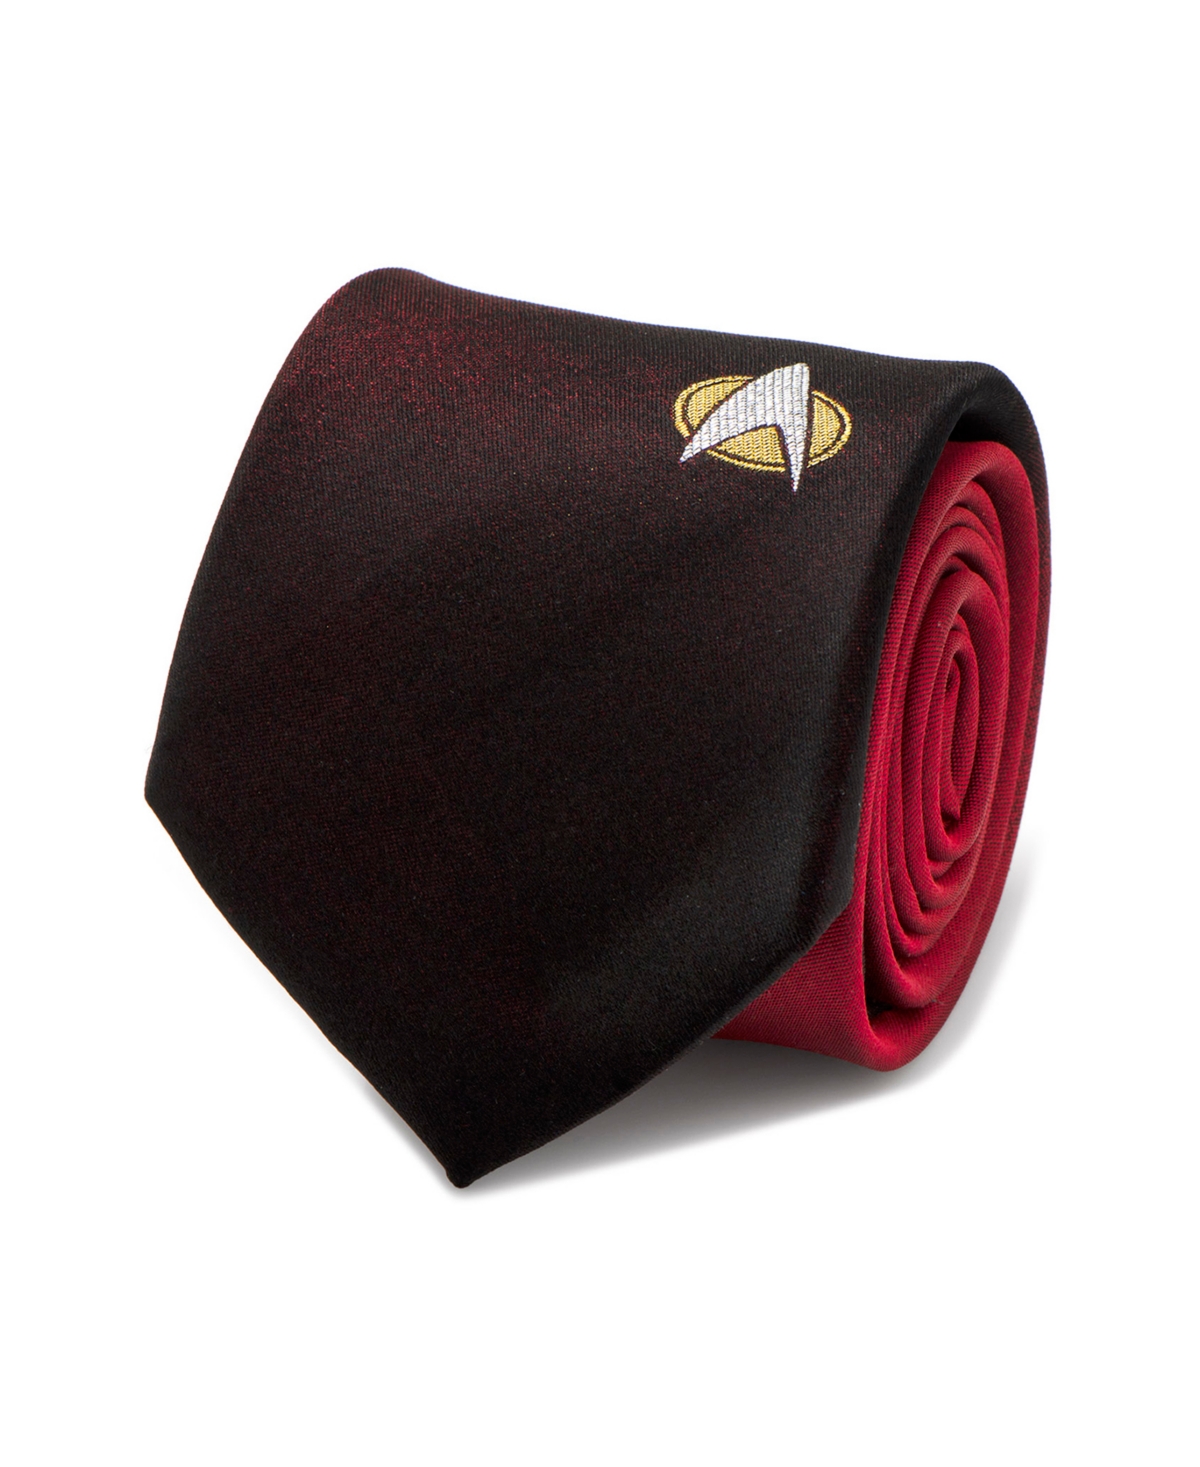 The Next Generation Shield Ombre Men's Tie - Red